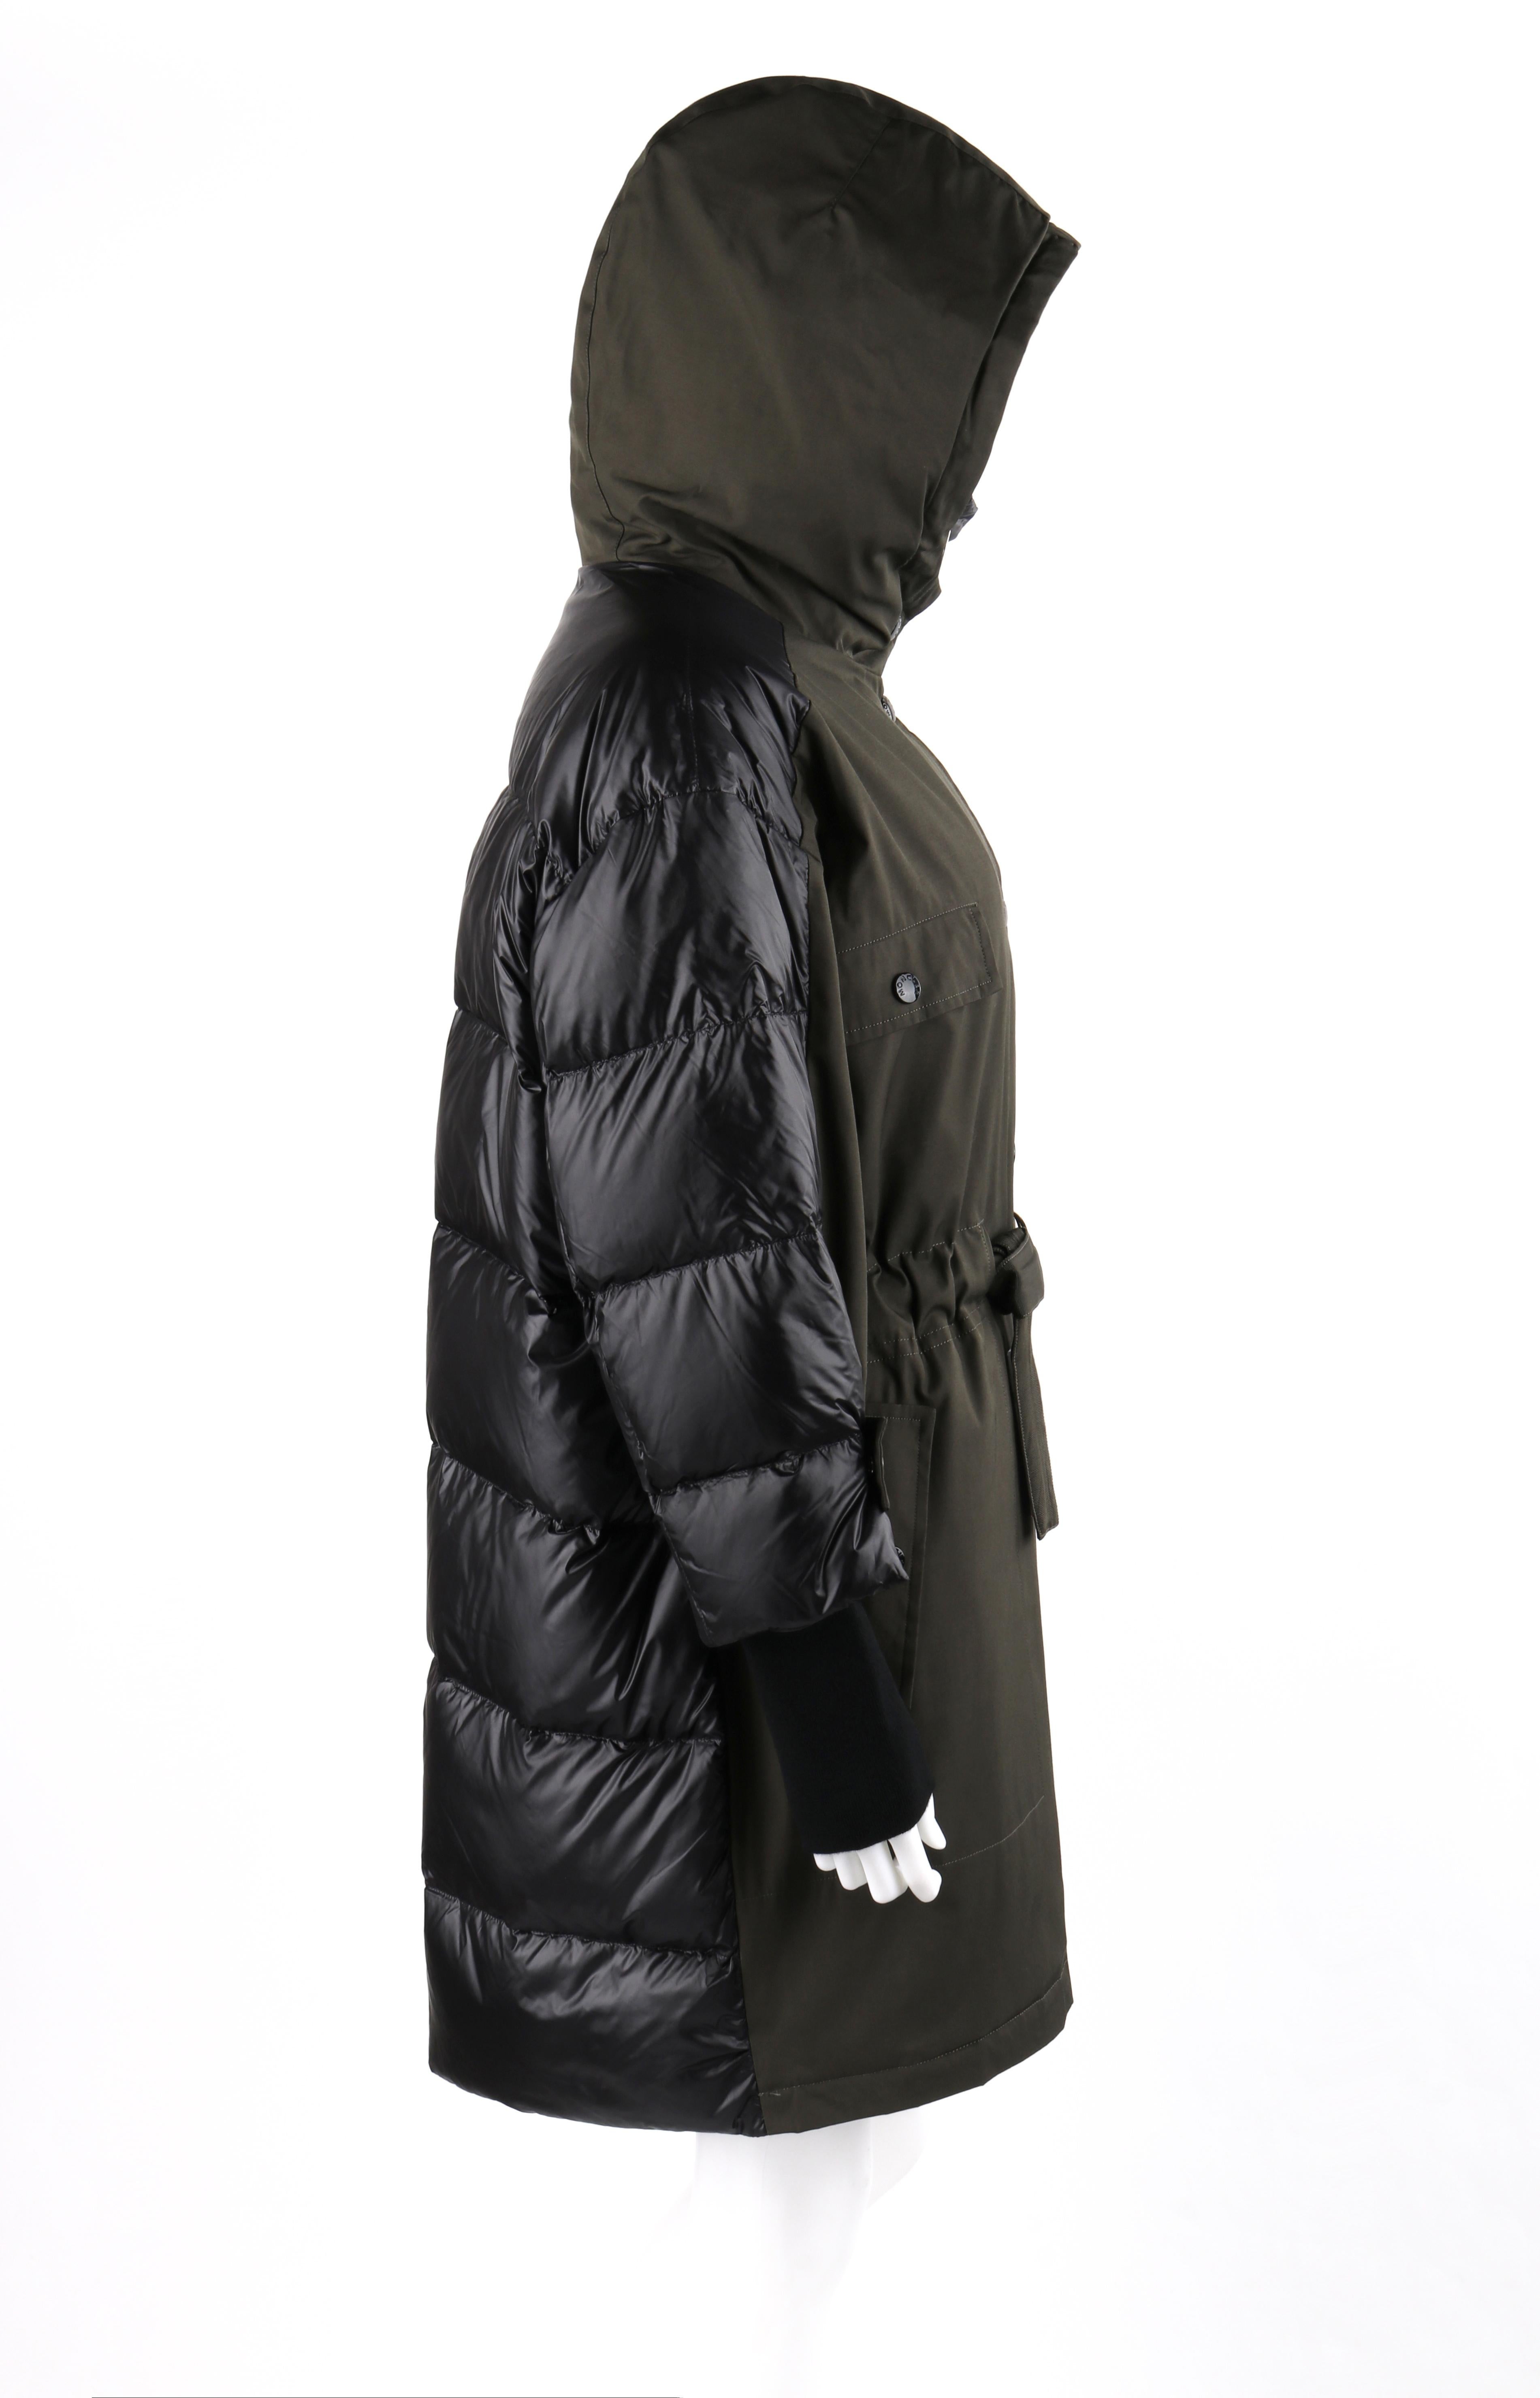 Women's MONCLER F/W 2018 “Ocean Giubbotto” Olive Black Puffer Layer Belted Hooded Jacket For Sale